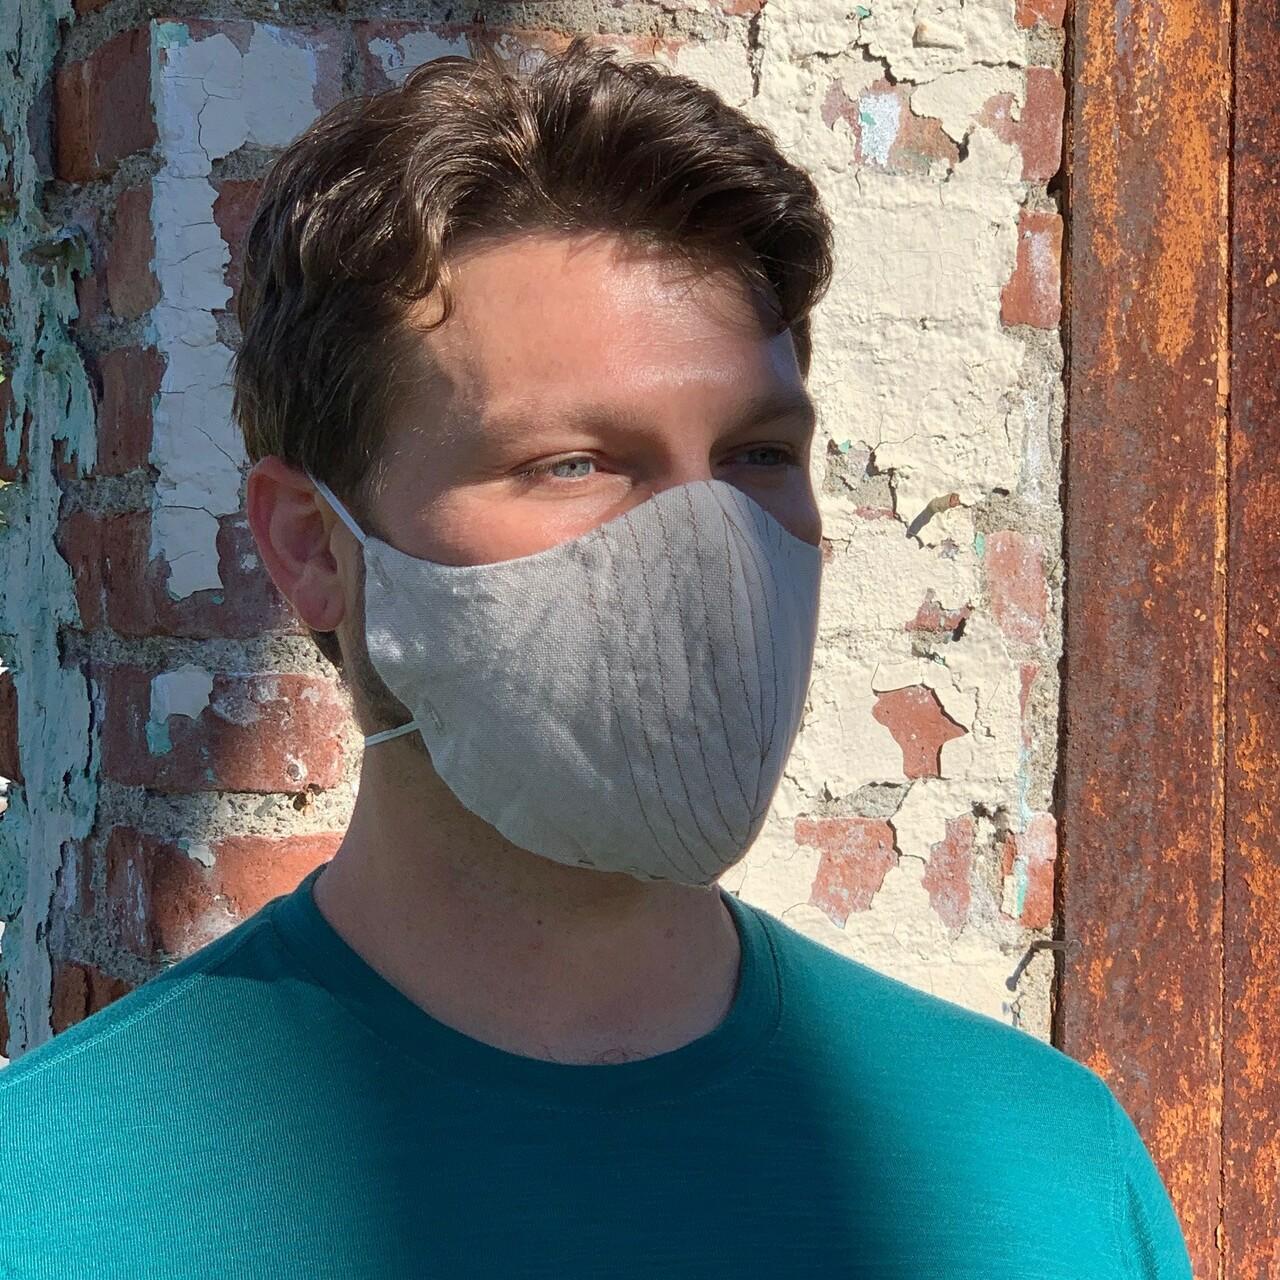 Linen Face Mask Benefits: 4 Reasons to Make the Switch - Linoto